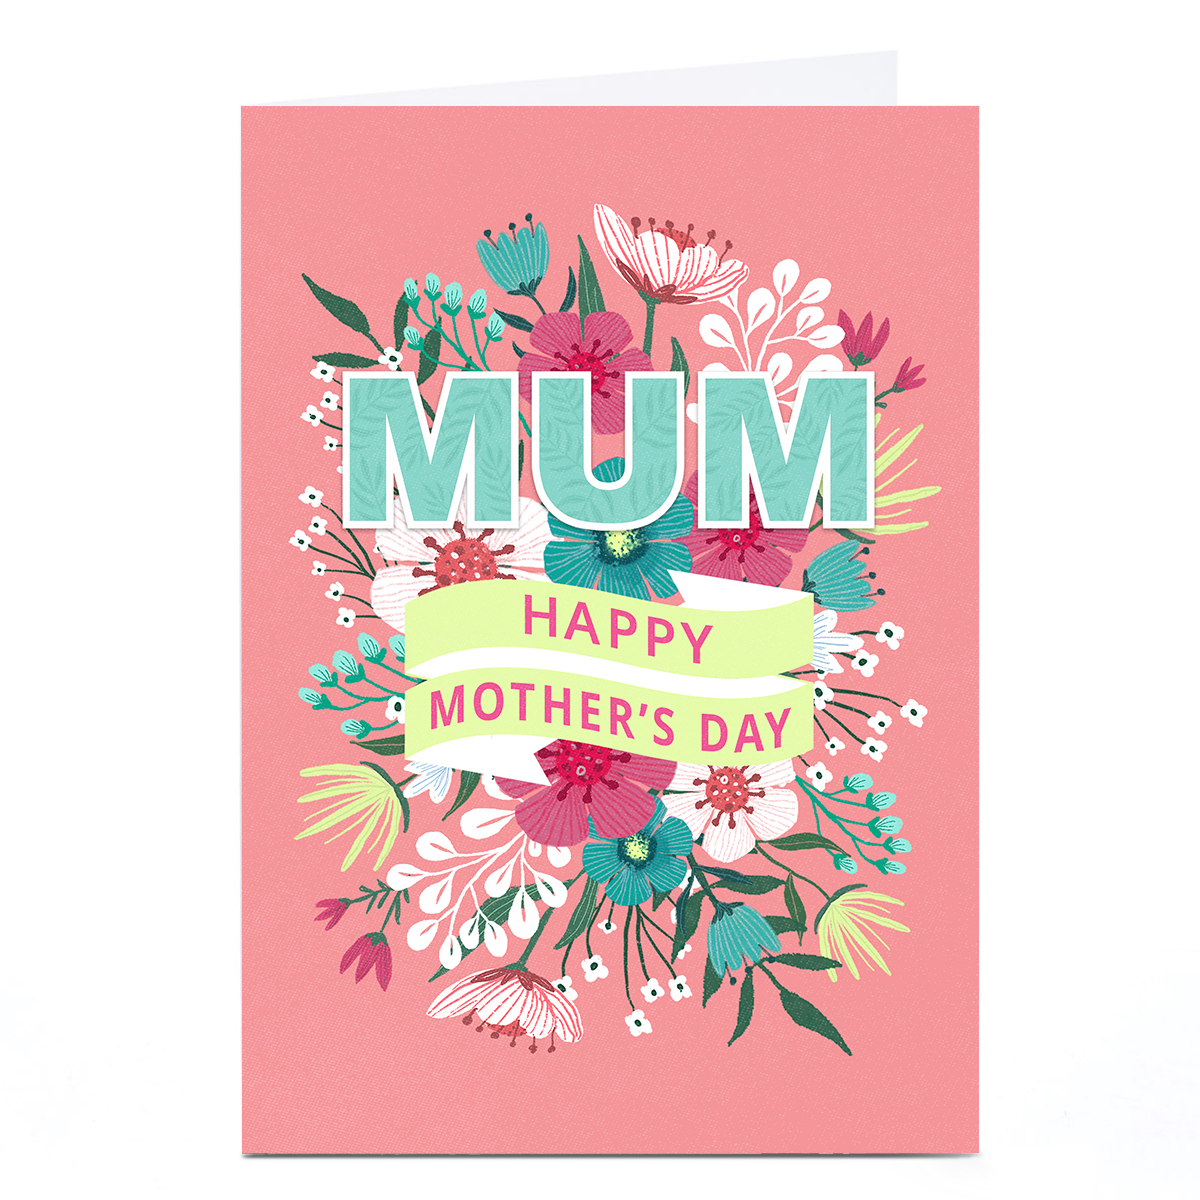 Personalised Dalia Clark Mother's Day Card - Mum with Flowers